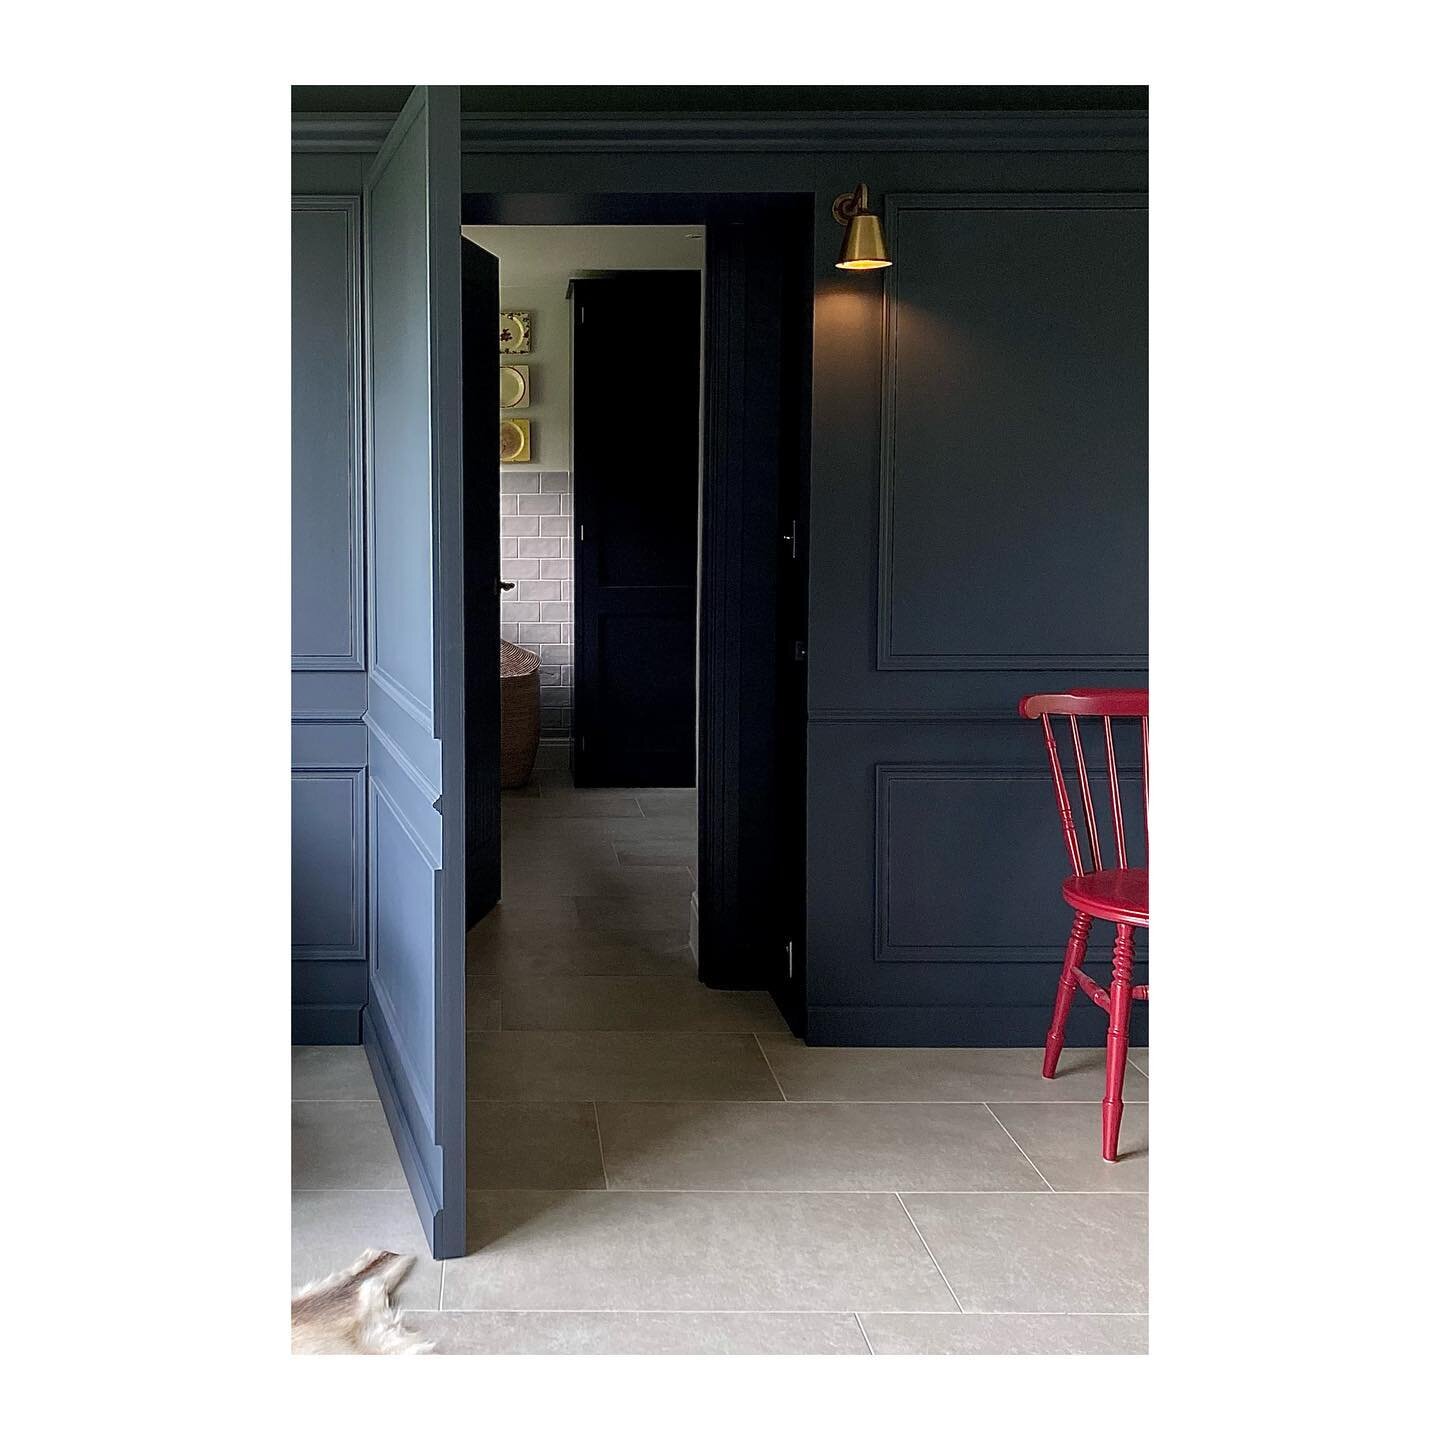 Do love the element of mystery created by a hidden door within panelling..
.
.
.
.
#bespokestudy #bespokepanelling #secretdoor #cotswoldinteriors #countryliving